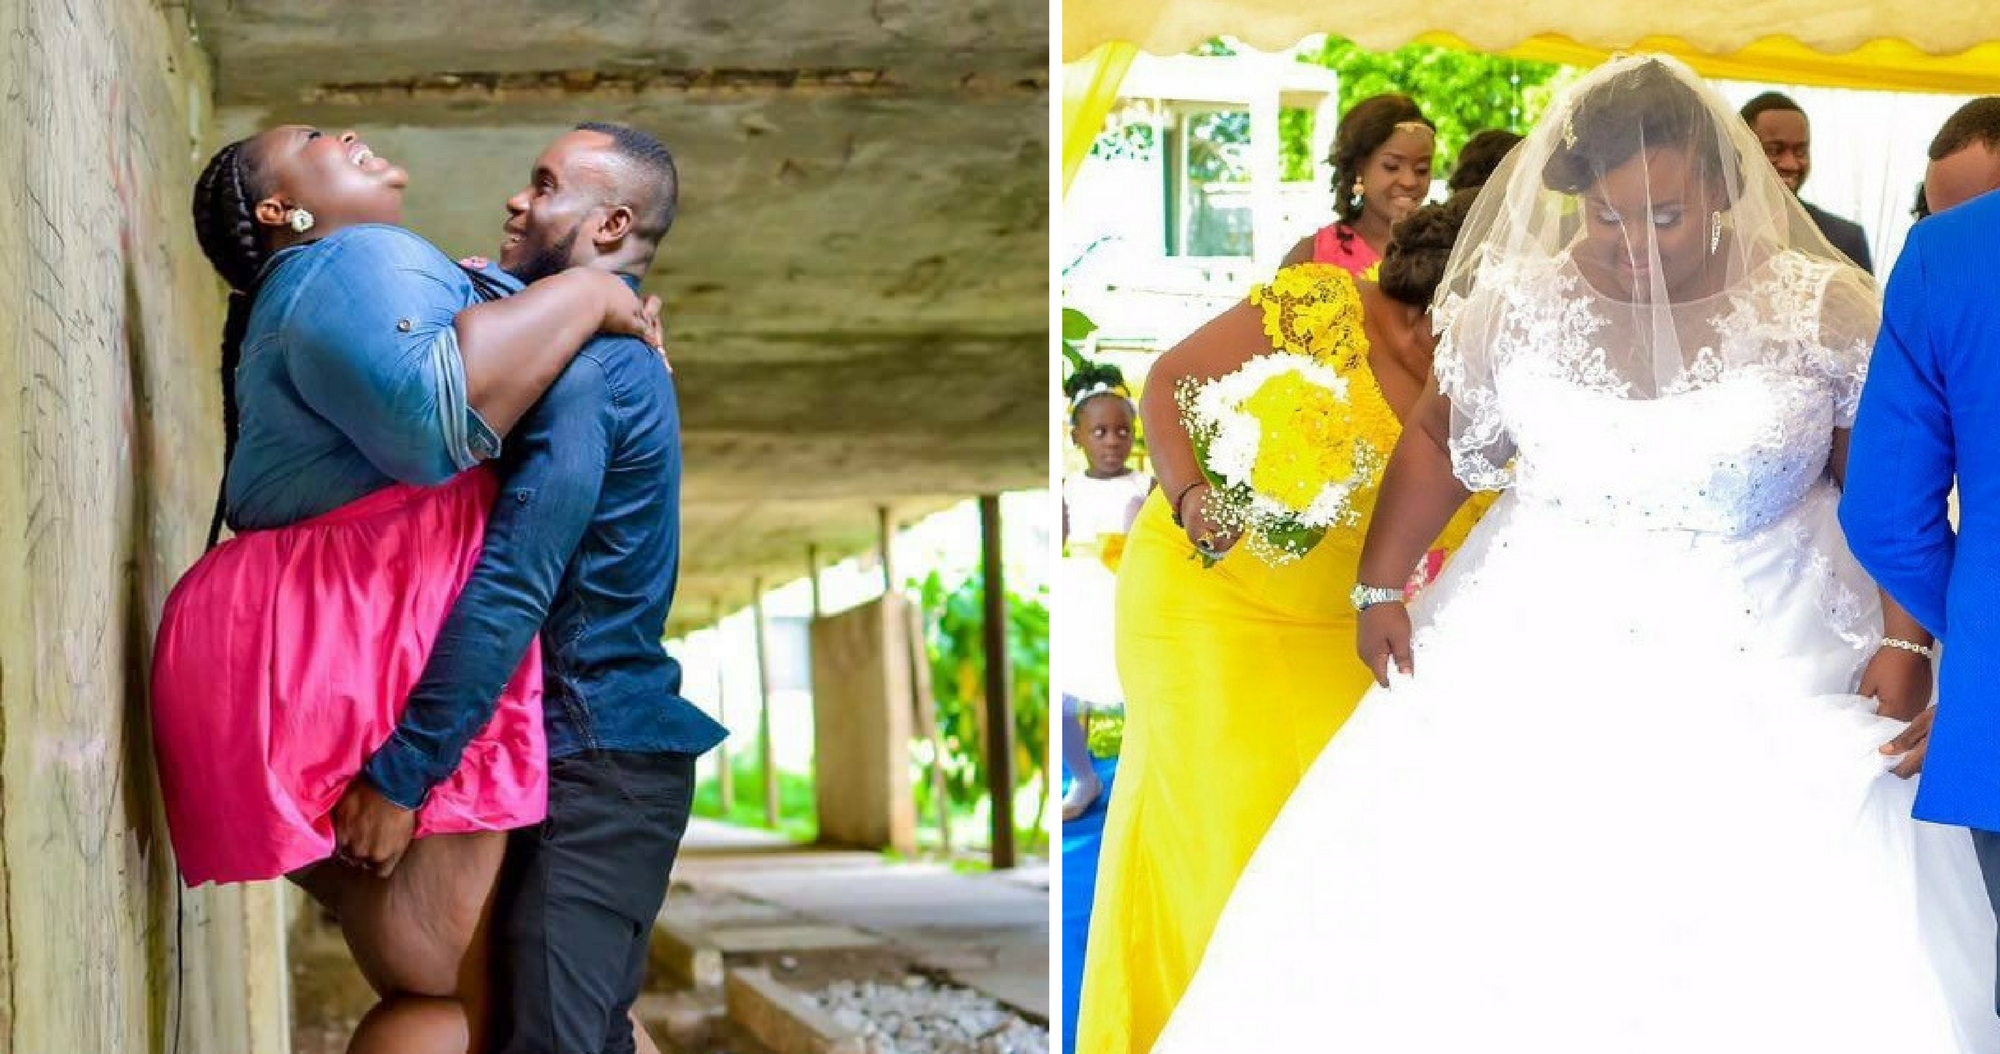 Bullied And Shamed After Posting Her Engagement Photos Bride To Be Gets Her Happily Ever After